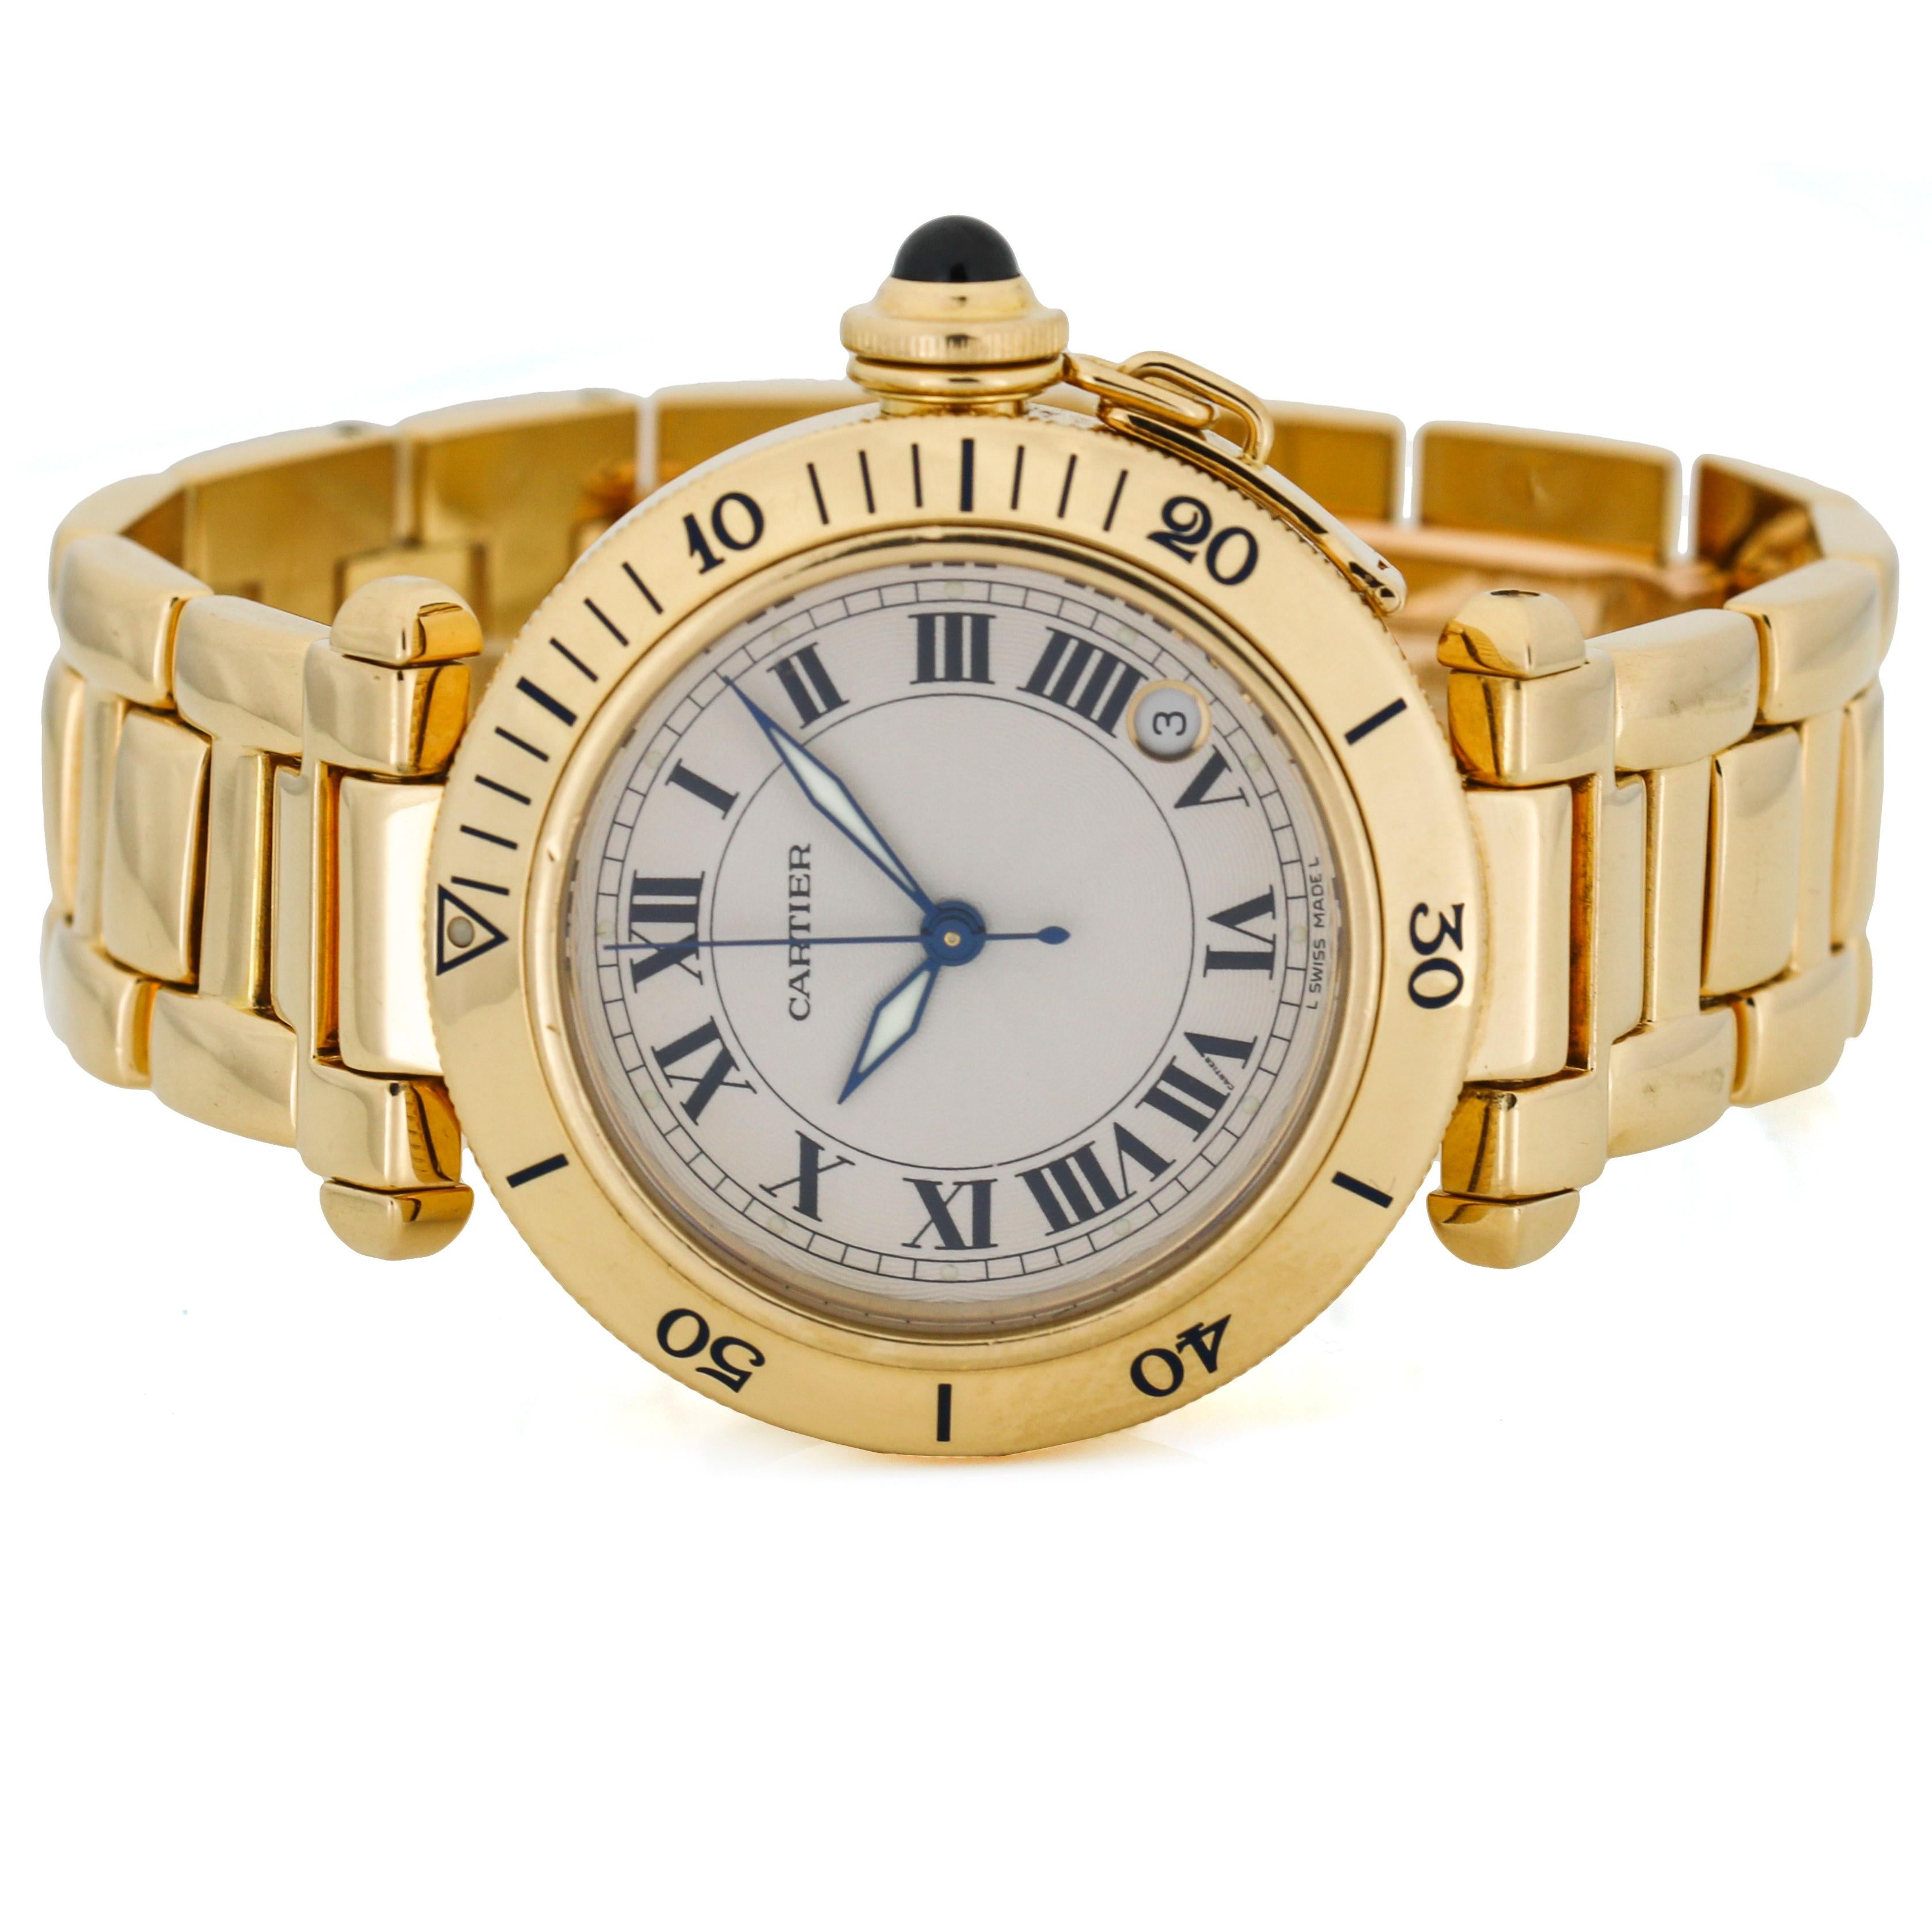 Cartier Pasha 18 Karat Yellow Gold Automatic Watch For Sale 2